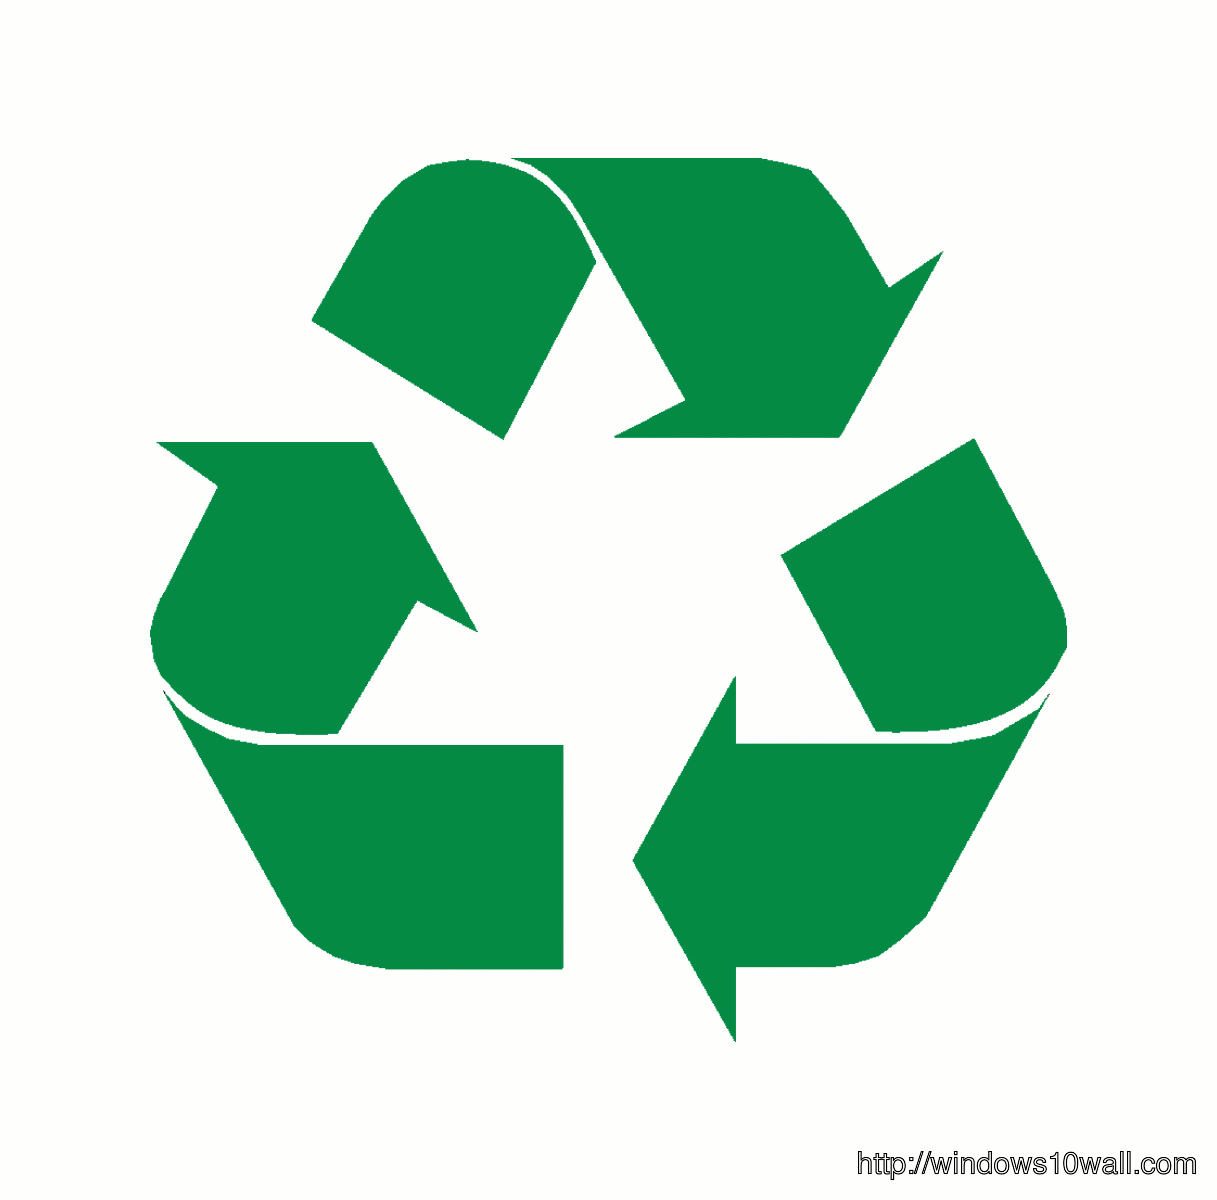 Recycle logo Background Wallpaper